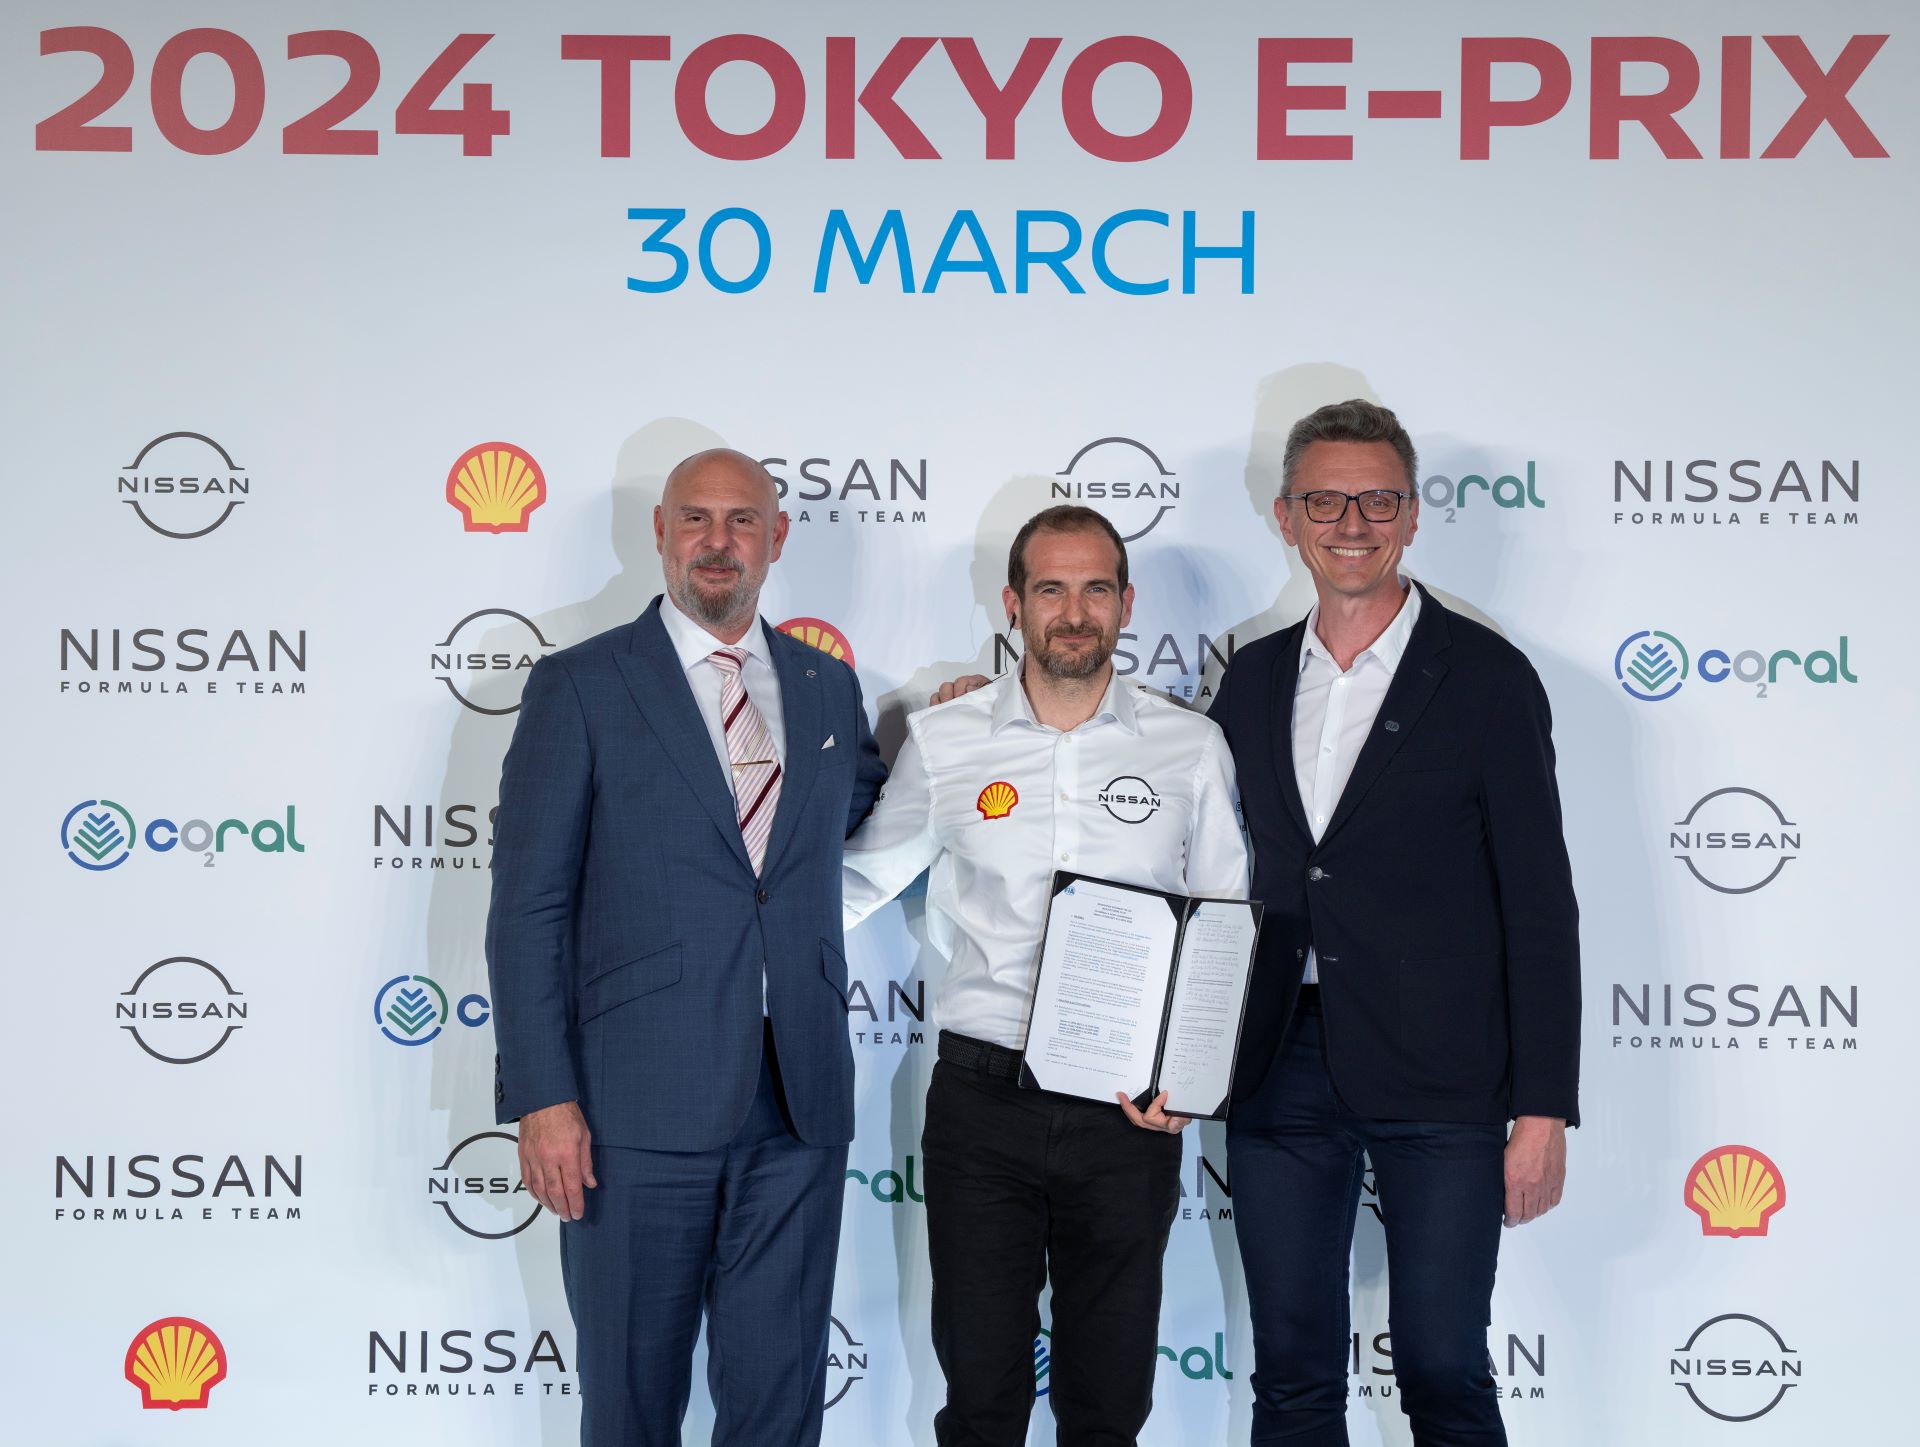 Nissan Pledges Long-Term Participation in Formula E with GEN4 Technology, Aligning with Electrification Goals Under Ambition 2030